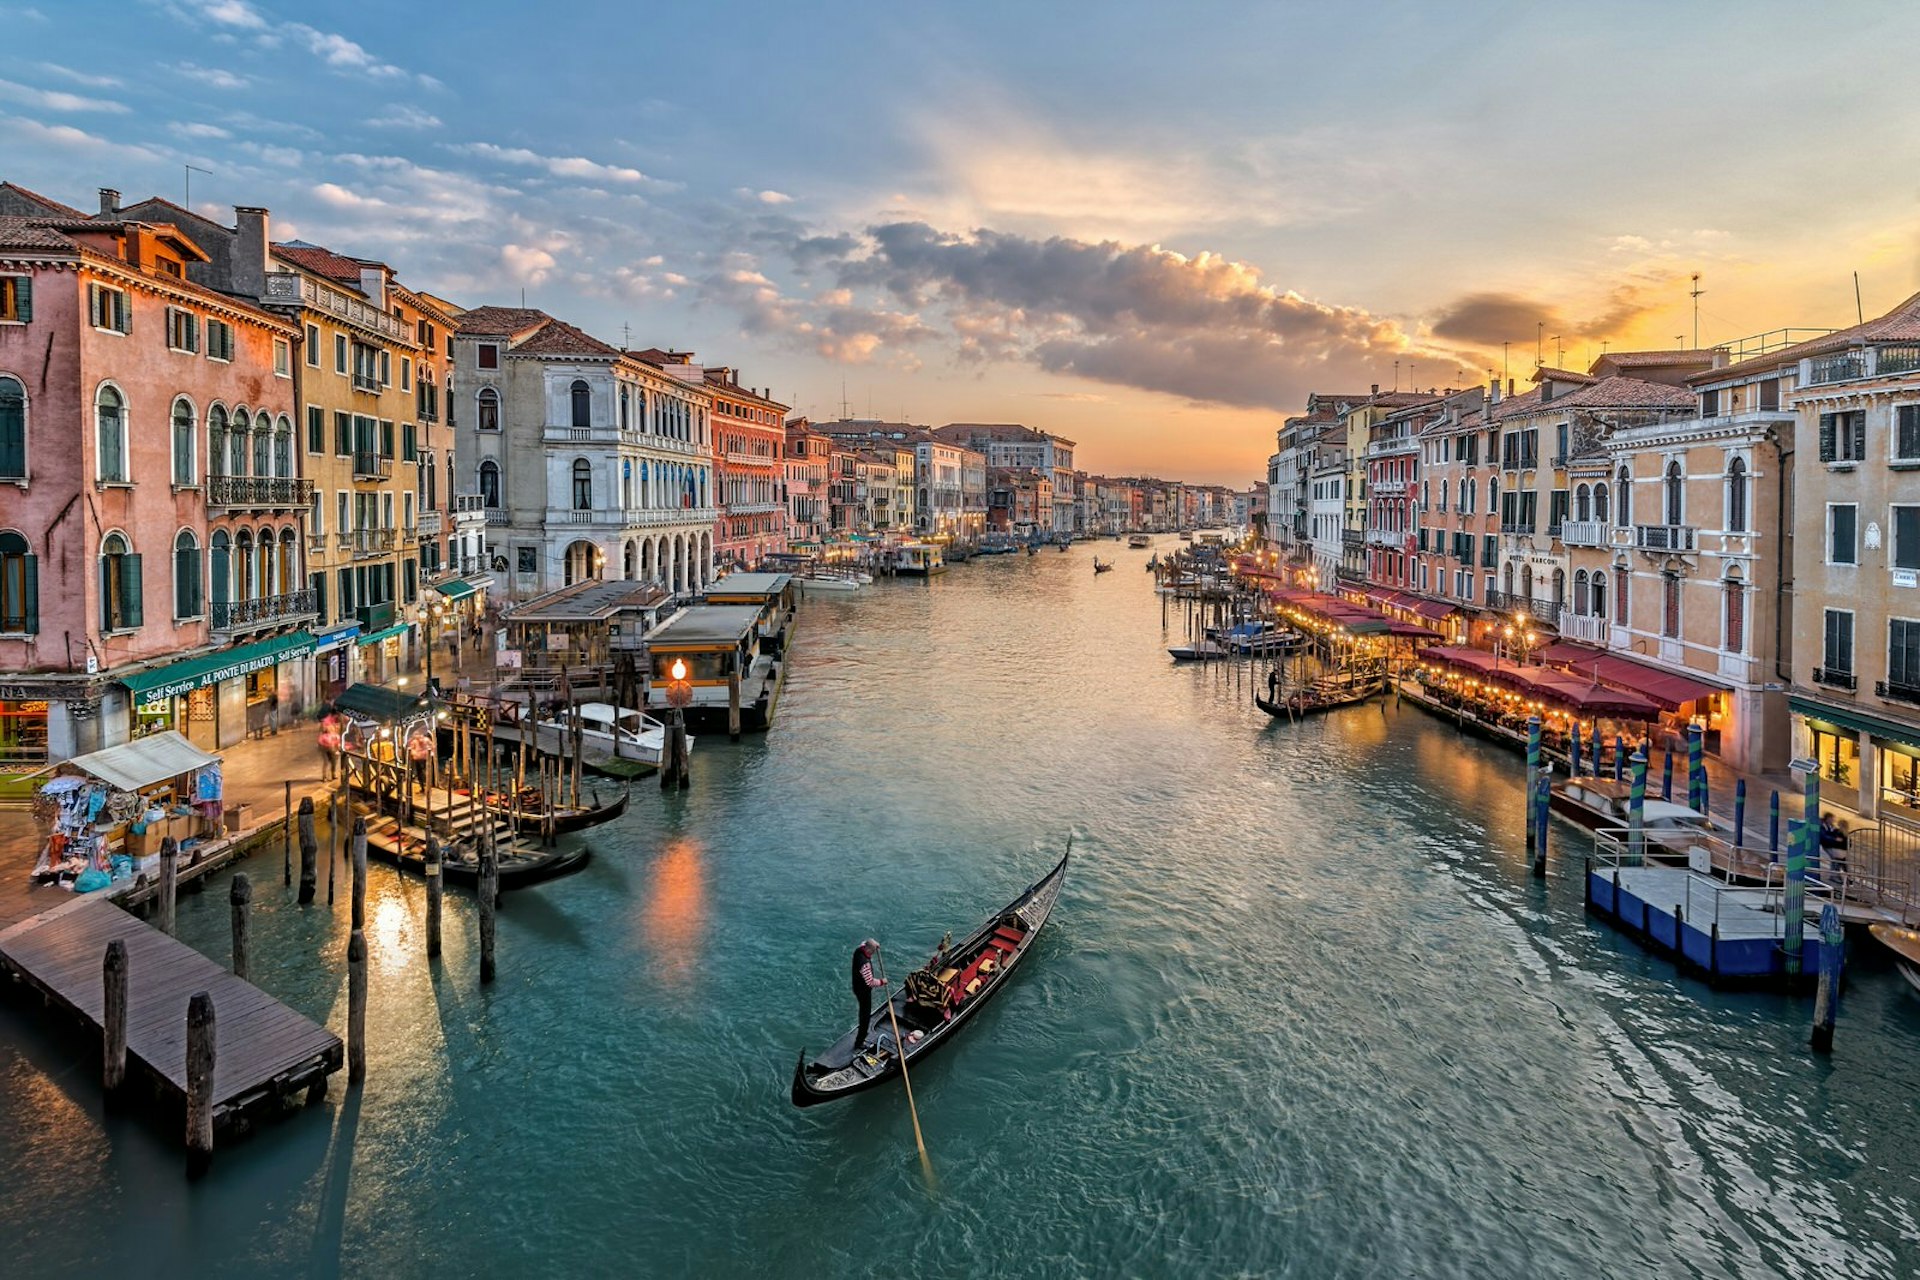 An elevated view of a Venice canal with lone gondola